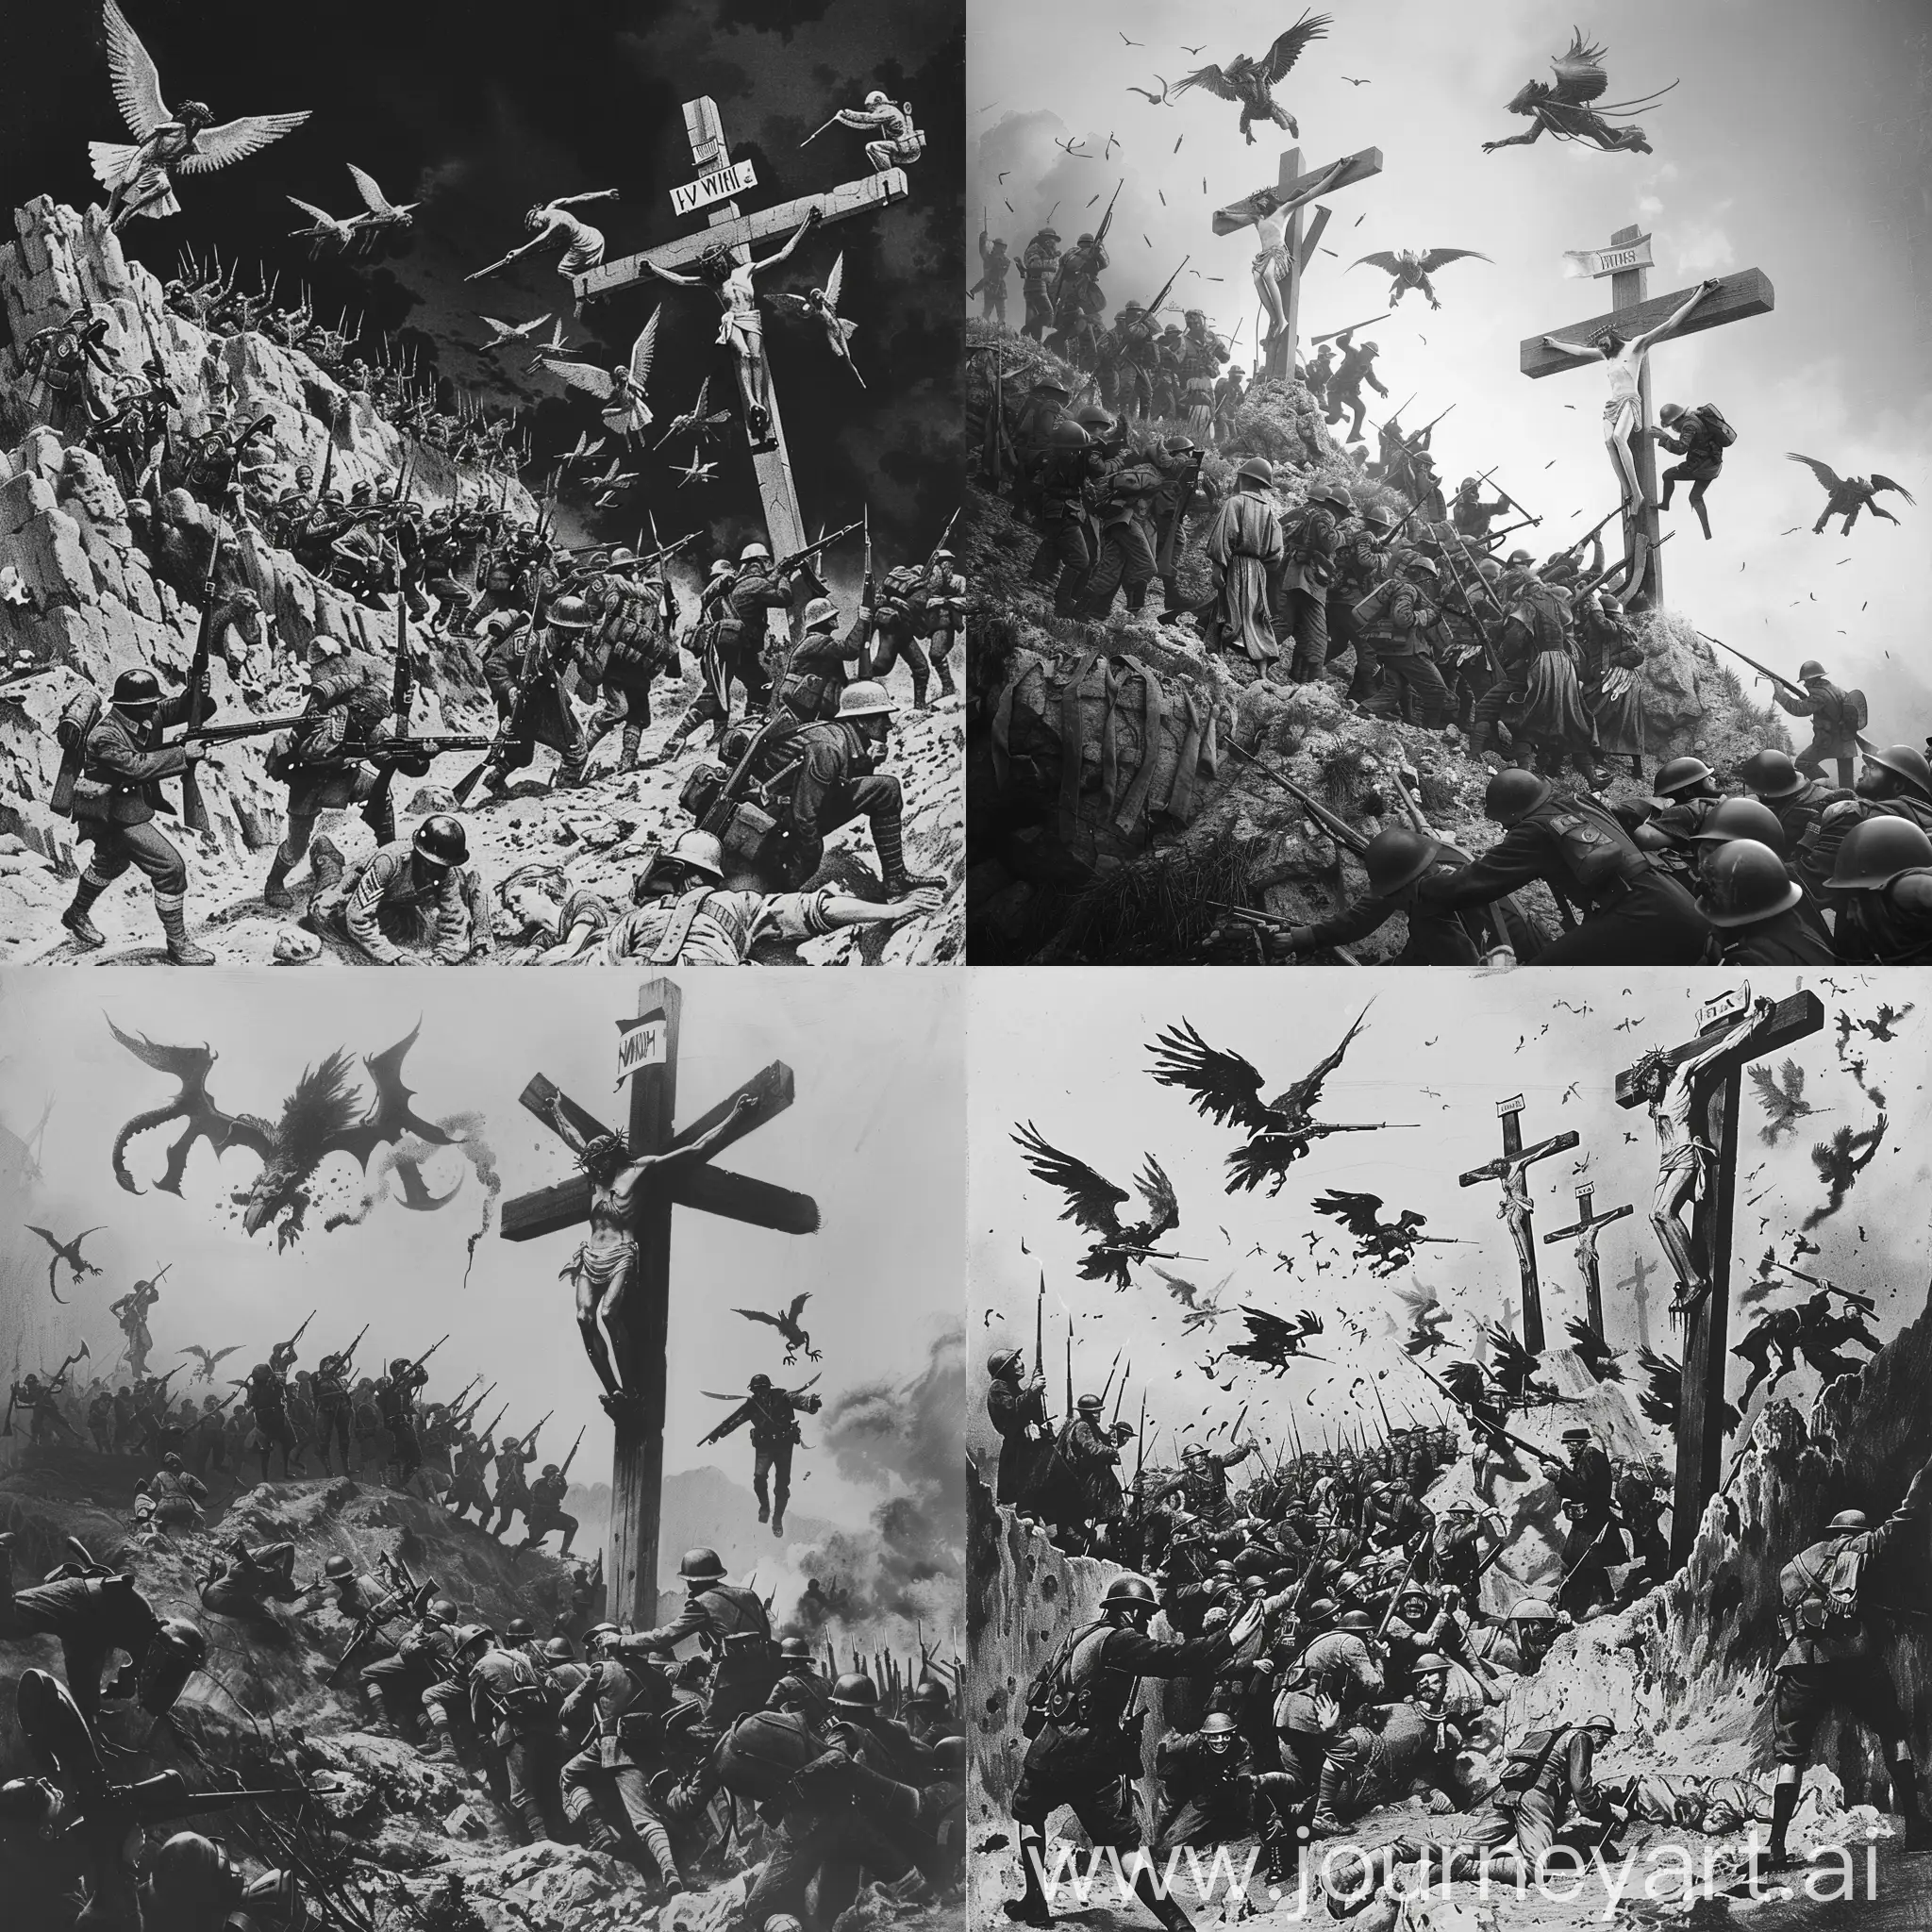 A nightmarish vision of the crucifixtion images of the crucifixion as a black and white nightmare with a crowd of ragged peasants trudging up the hill to the feet of the crosses with a squad of soldiers dressed in WWI uniforms attacking them with rifles and bayonets, as a group of winged creatures observe from above 